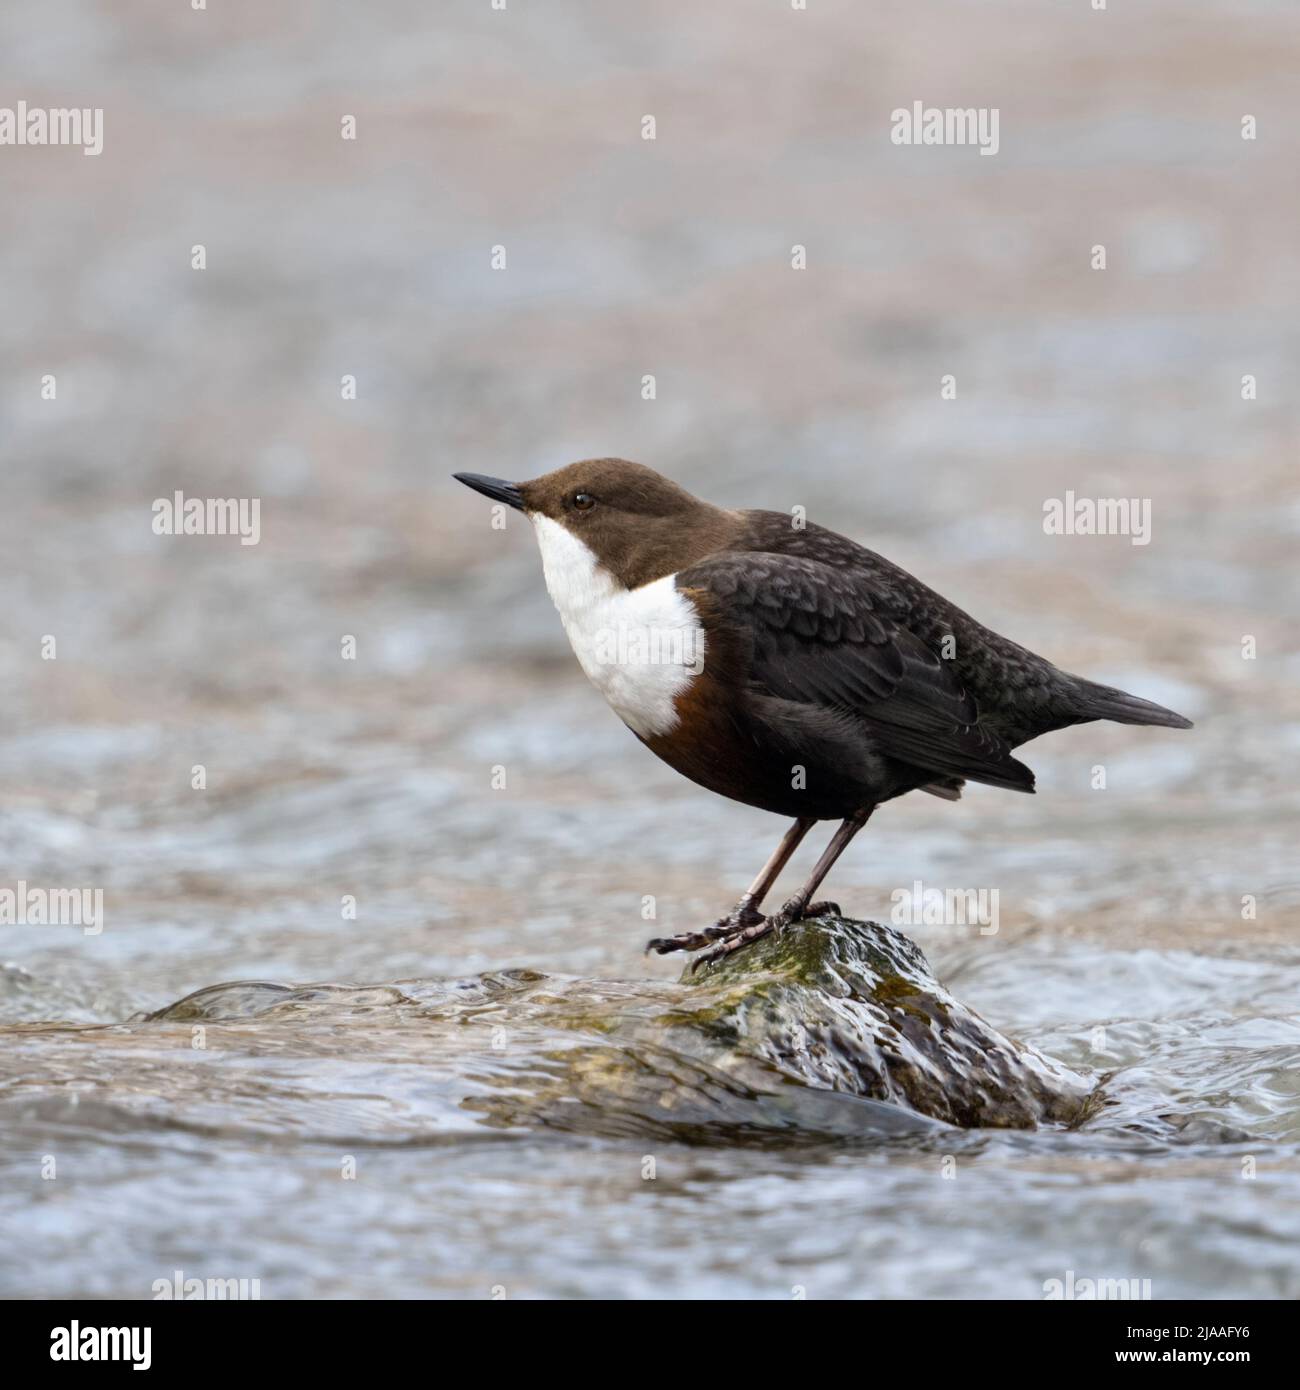 White throated Dipper / Wasseramsel ( Cinclus cinclus ) stands on a rock in fast flowing water, bobs up and down, hunting, wildlife, Europe. Stock Photo